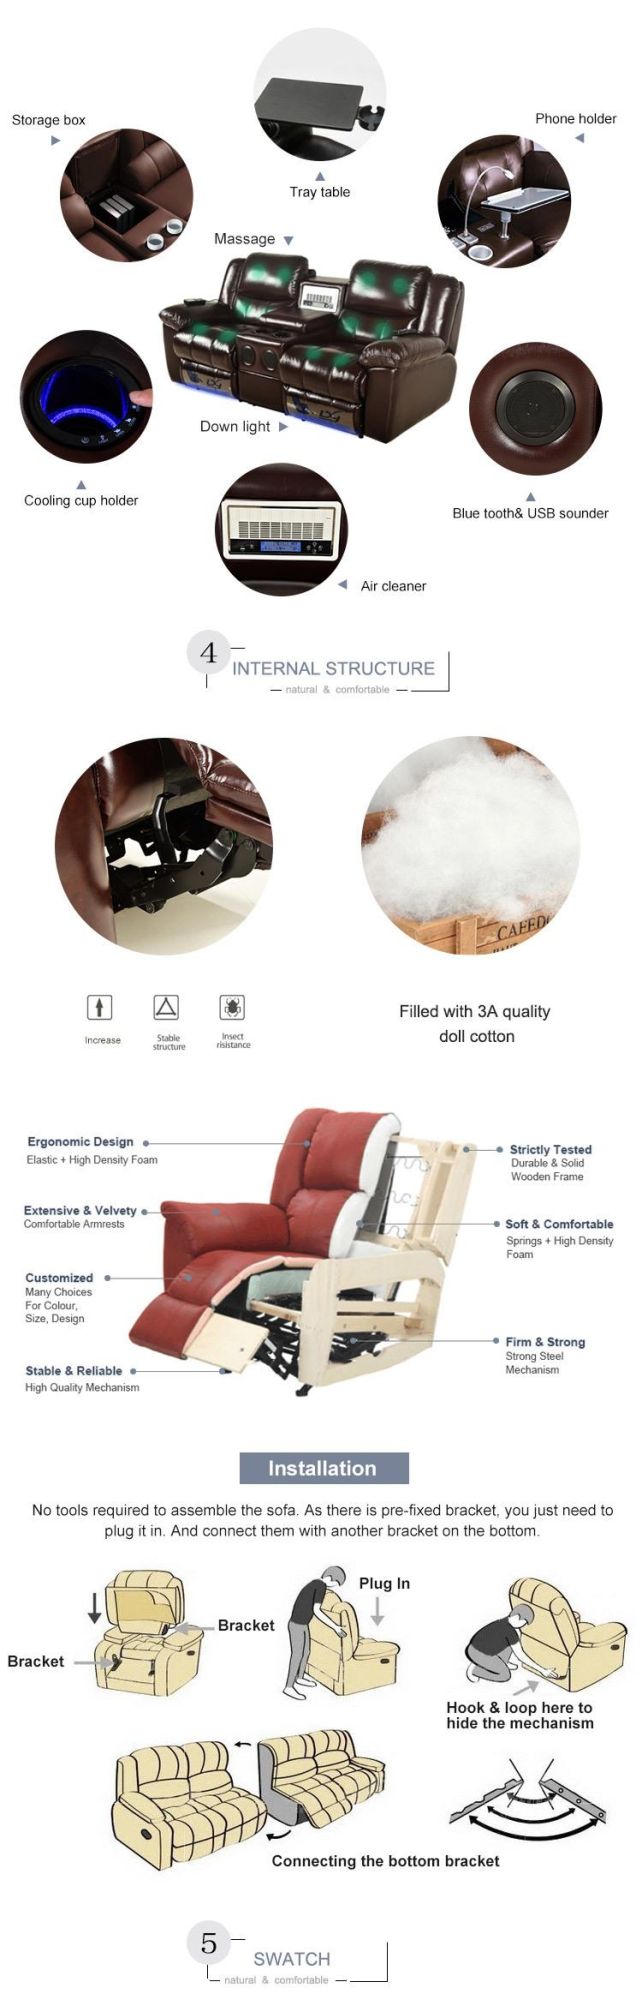 Reclining Theater Seating Best Home Recliner Chair with Storage and Cup